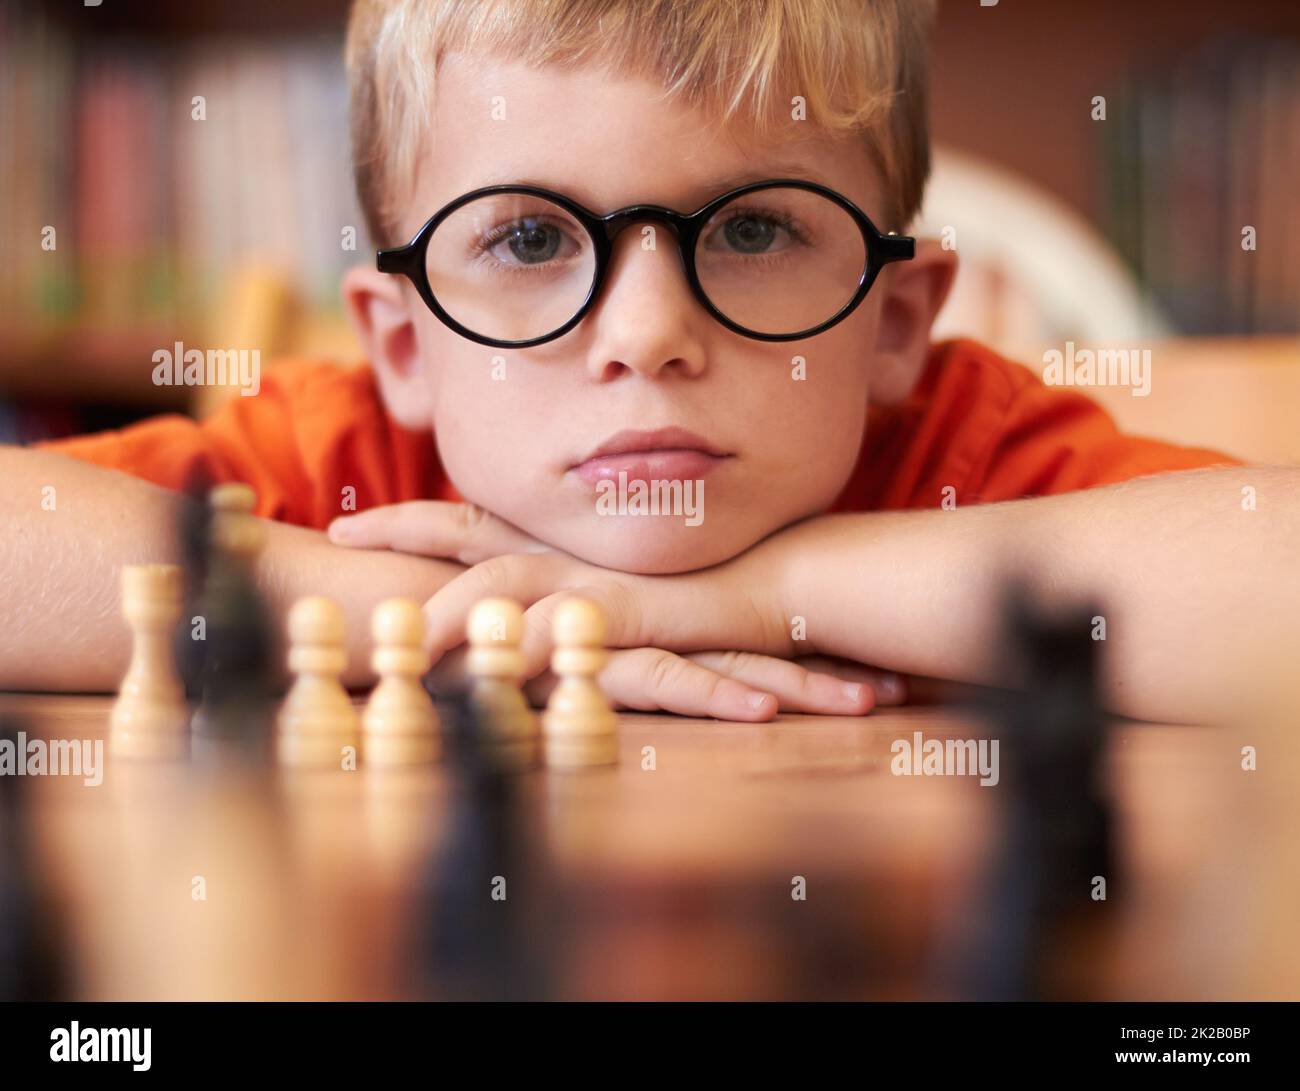 Pondering his next move. Young boy wearing spectacles and playing chess. Stock Photo